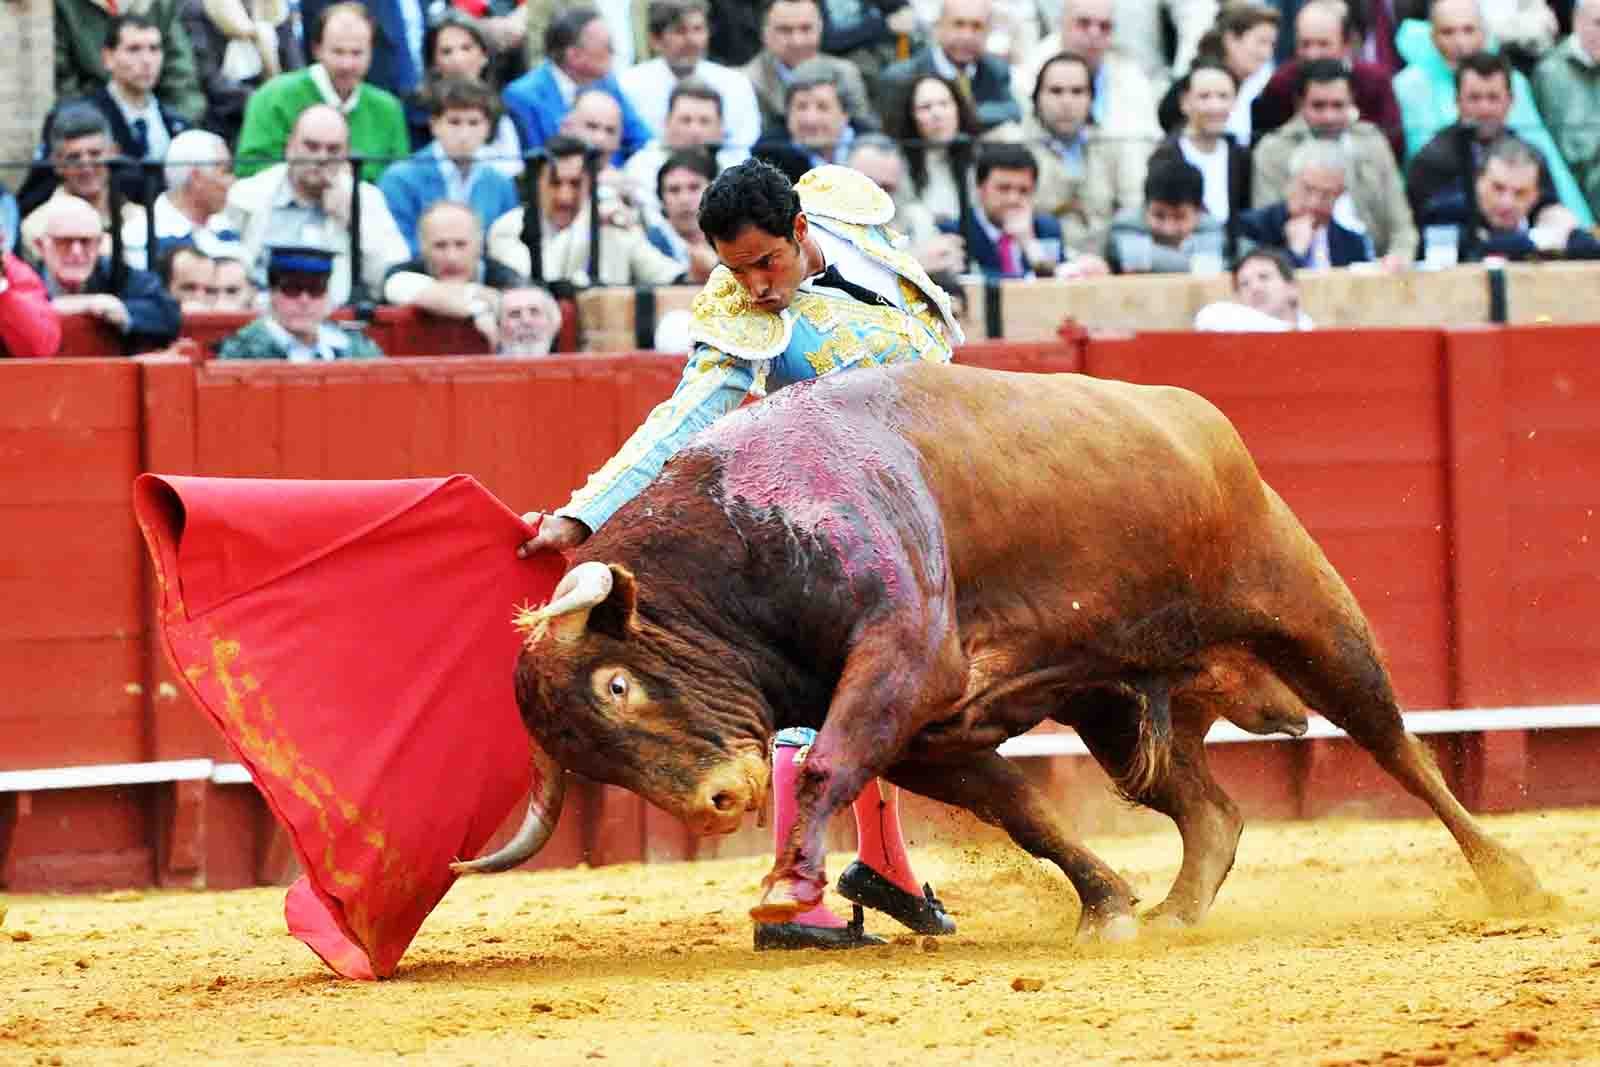 How to see corrida in Seville